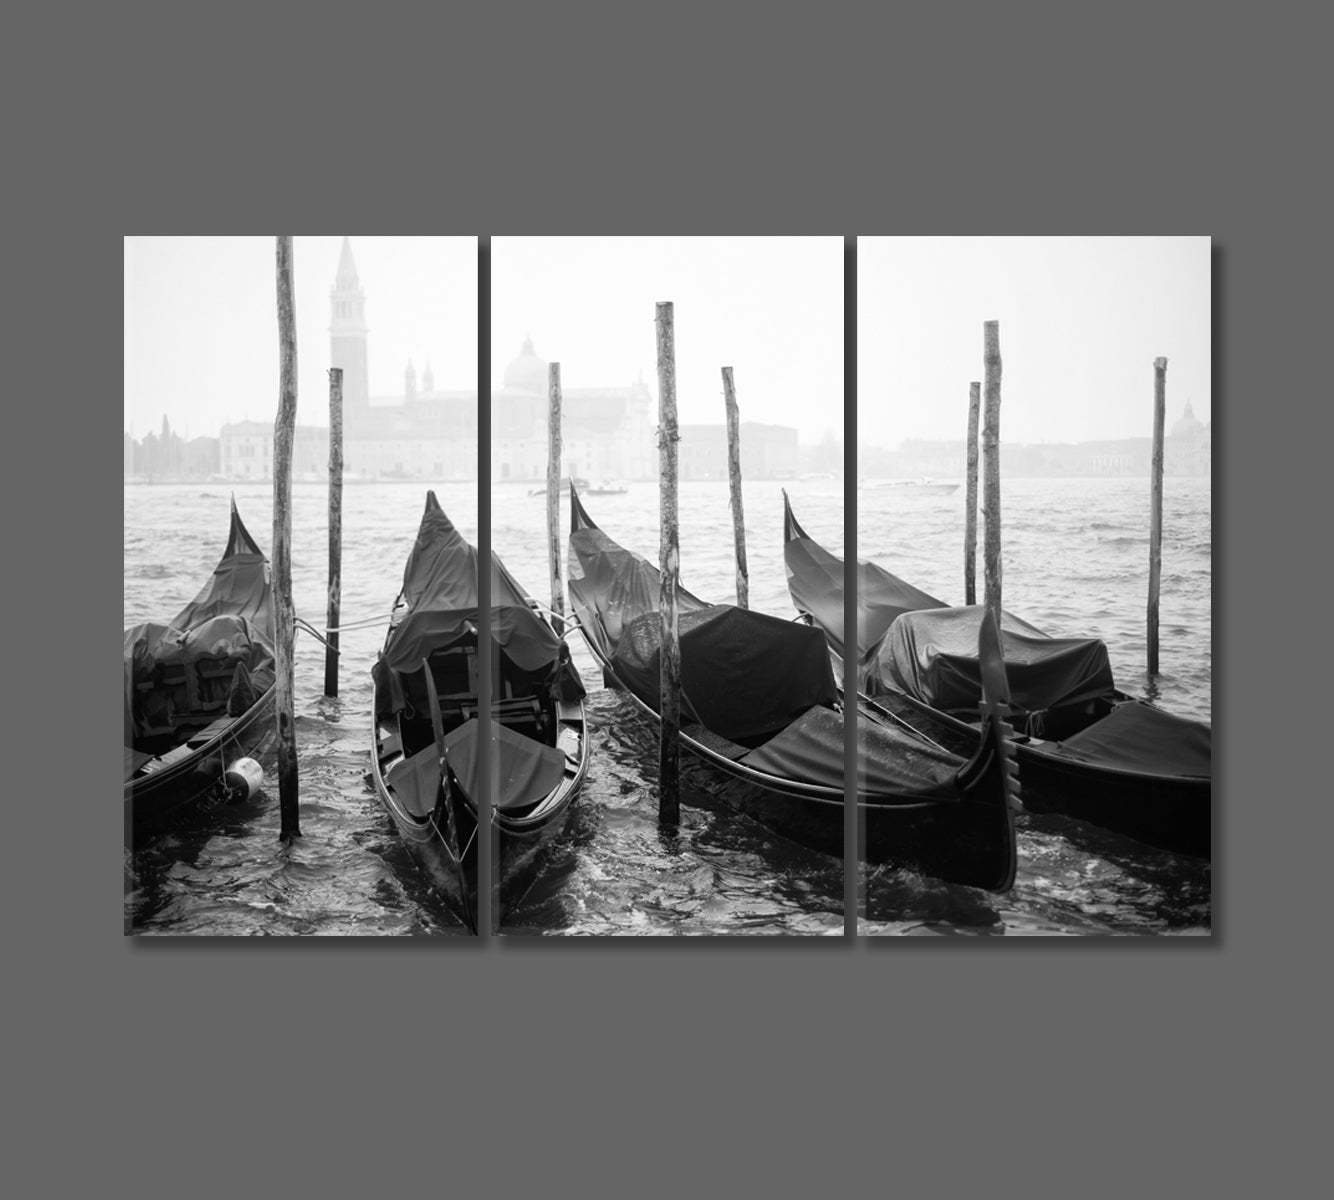 Gondolas on Grand Canal Venice Italy in Black and White Canvas Print-Canvas Print-CetArt-3 Panels-36x24 inches-CetArt